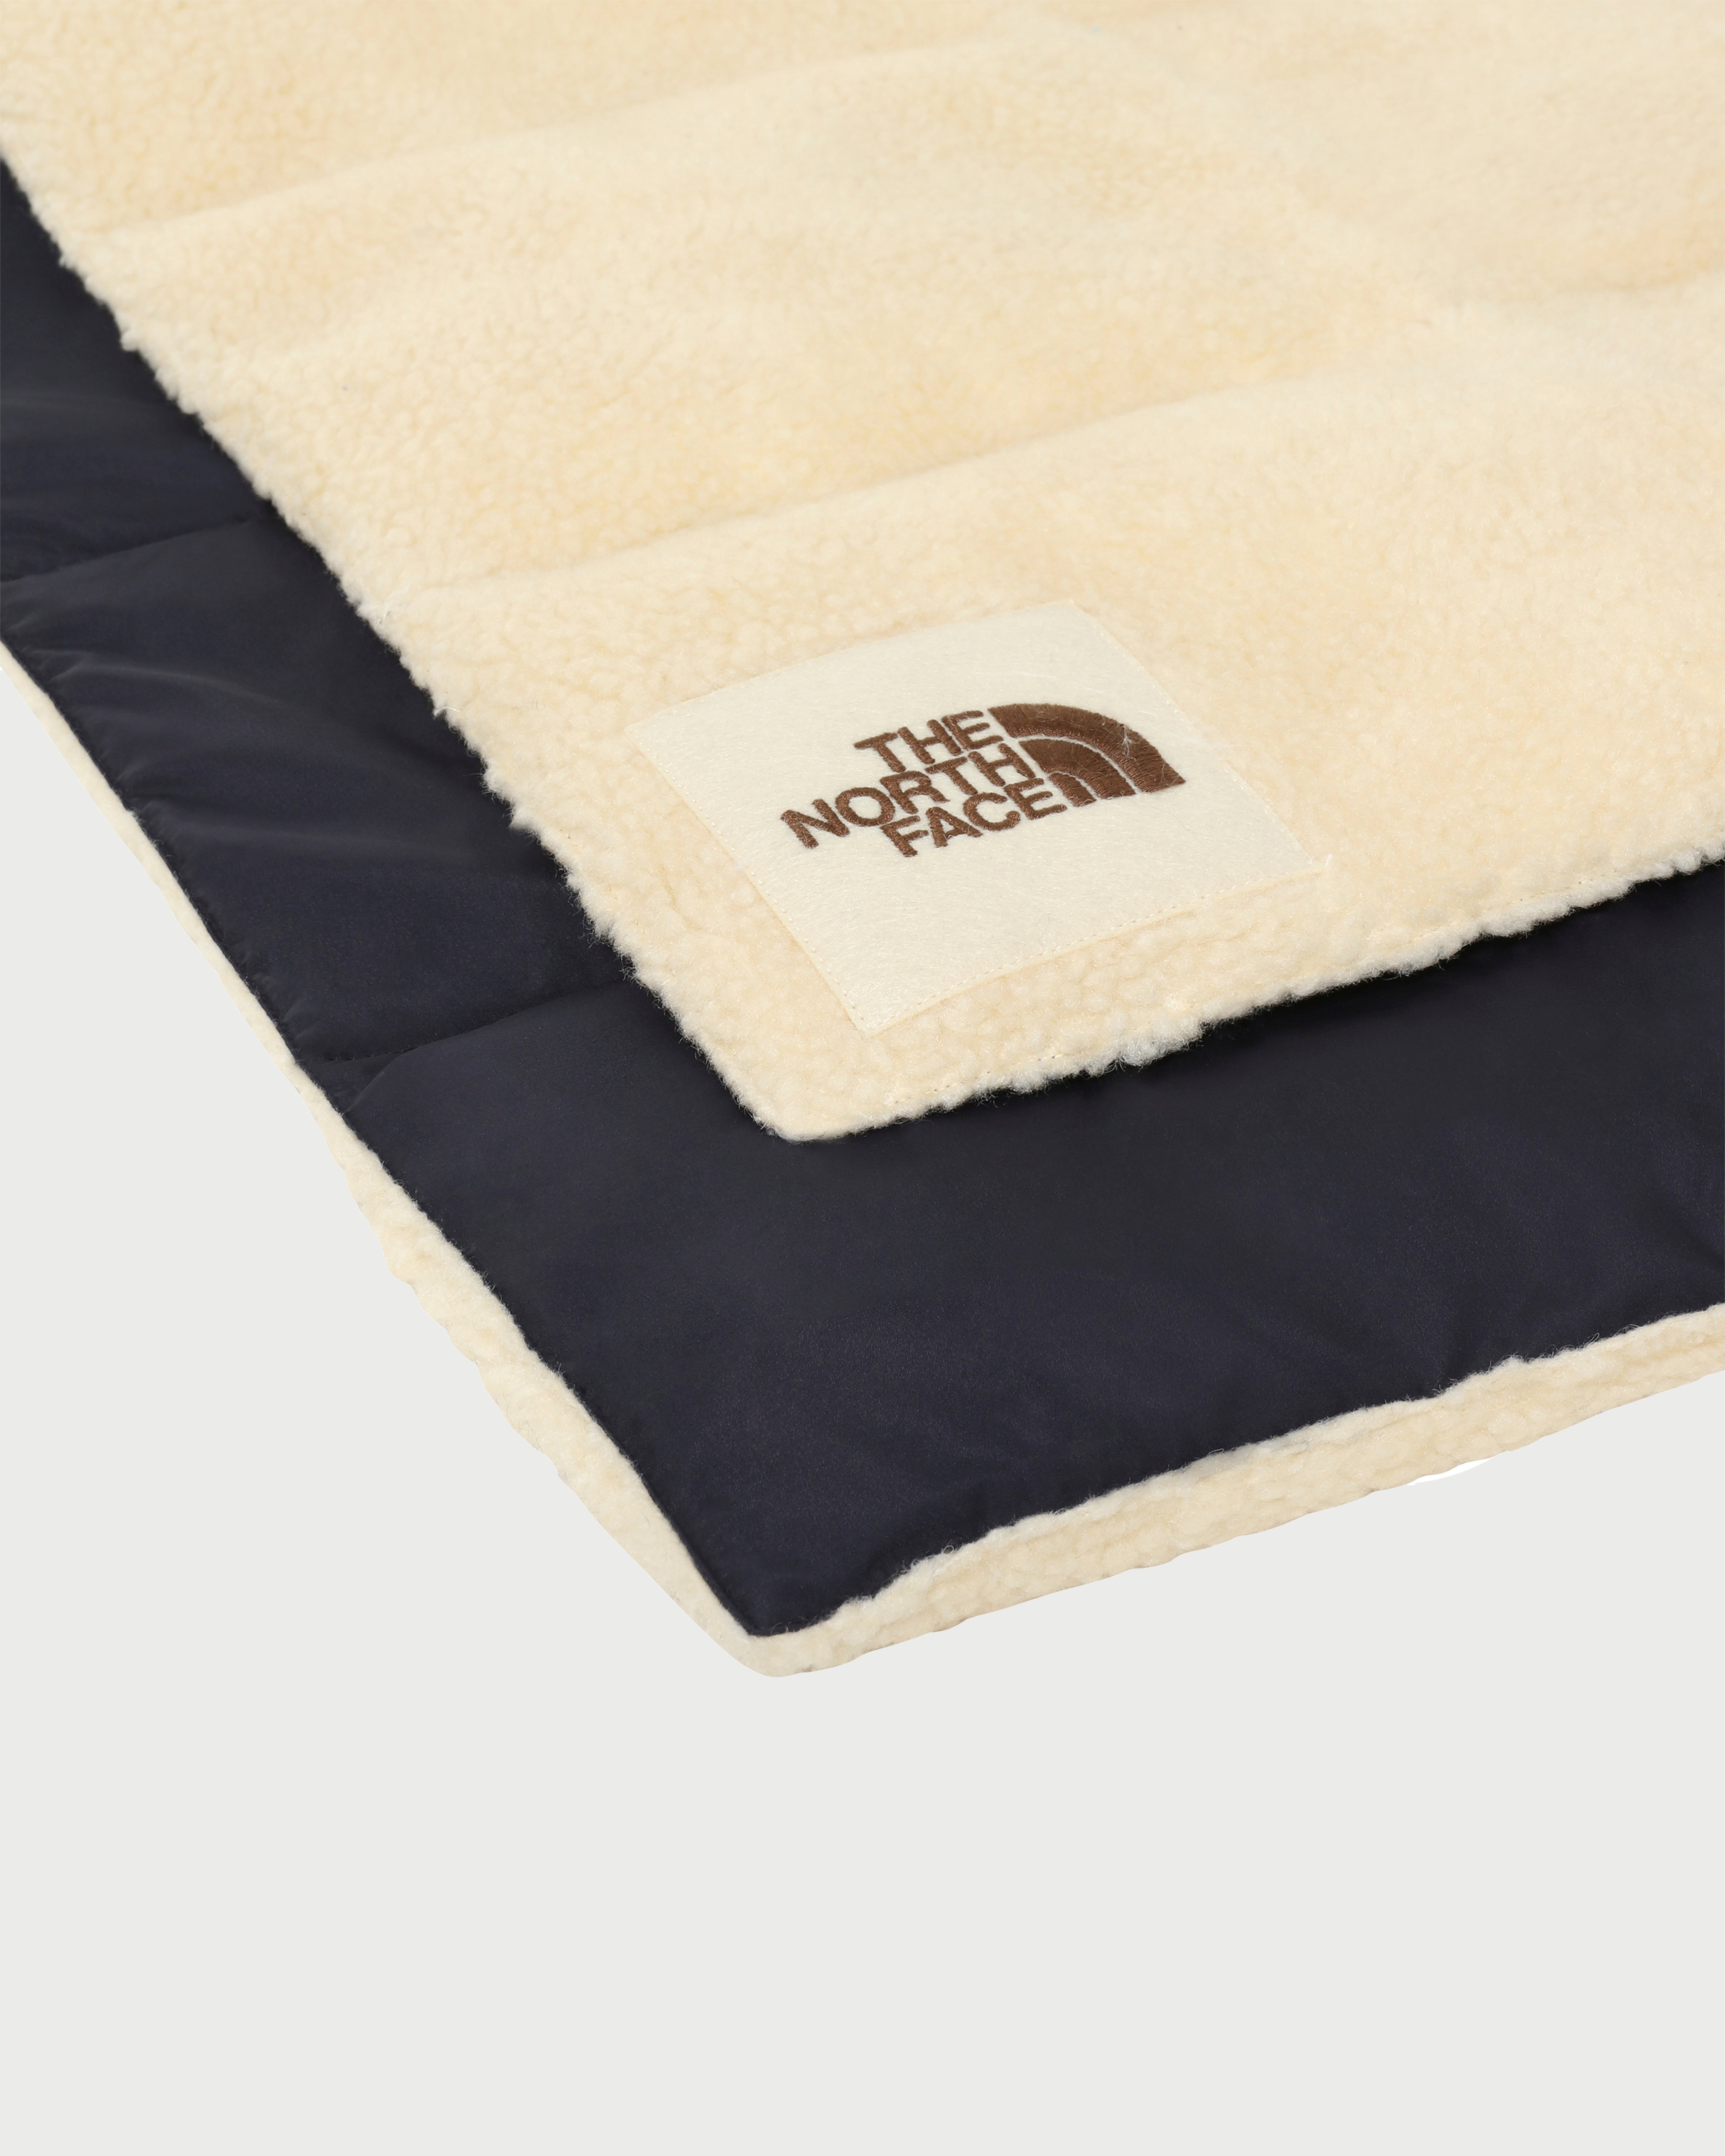 The North Face - Brown Label Insulated Scarf Bleached Sand Unisex - Accessories - Yellow - Image 2